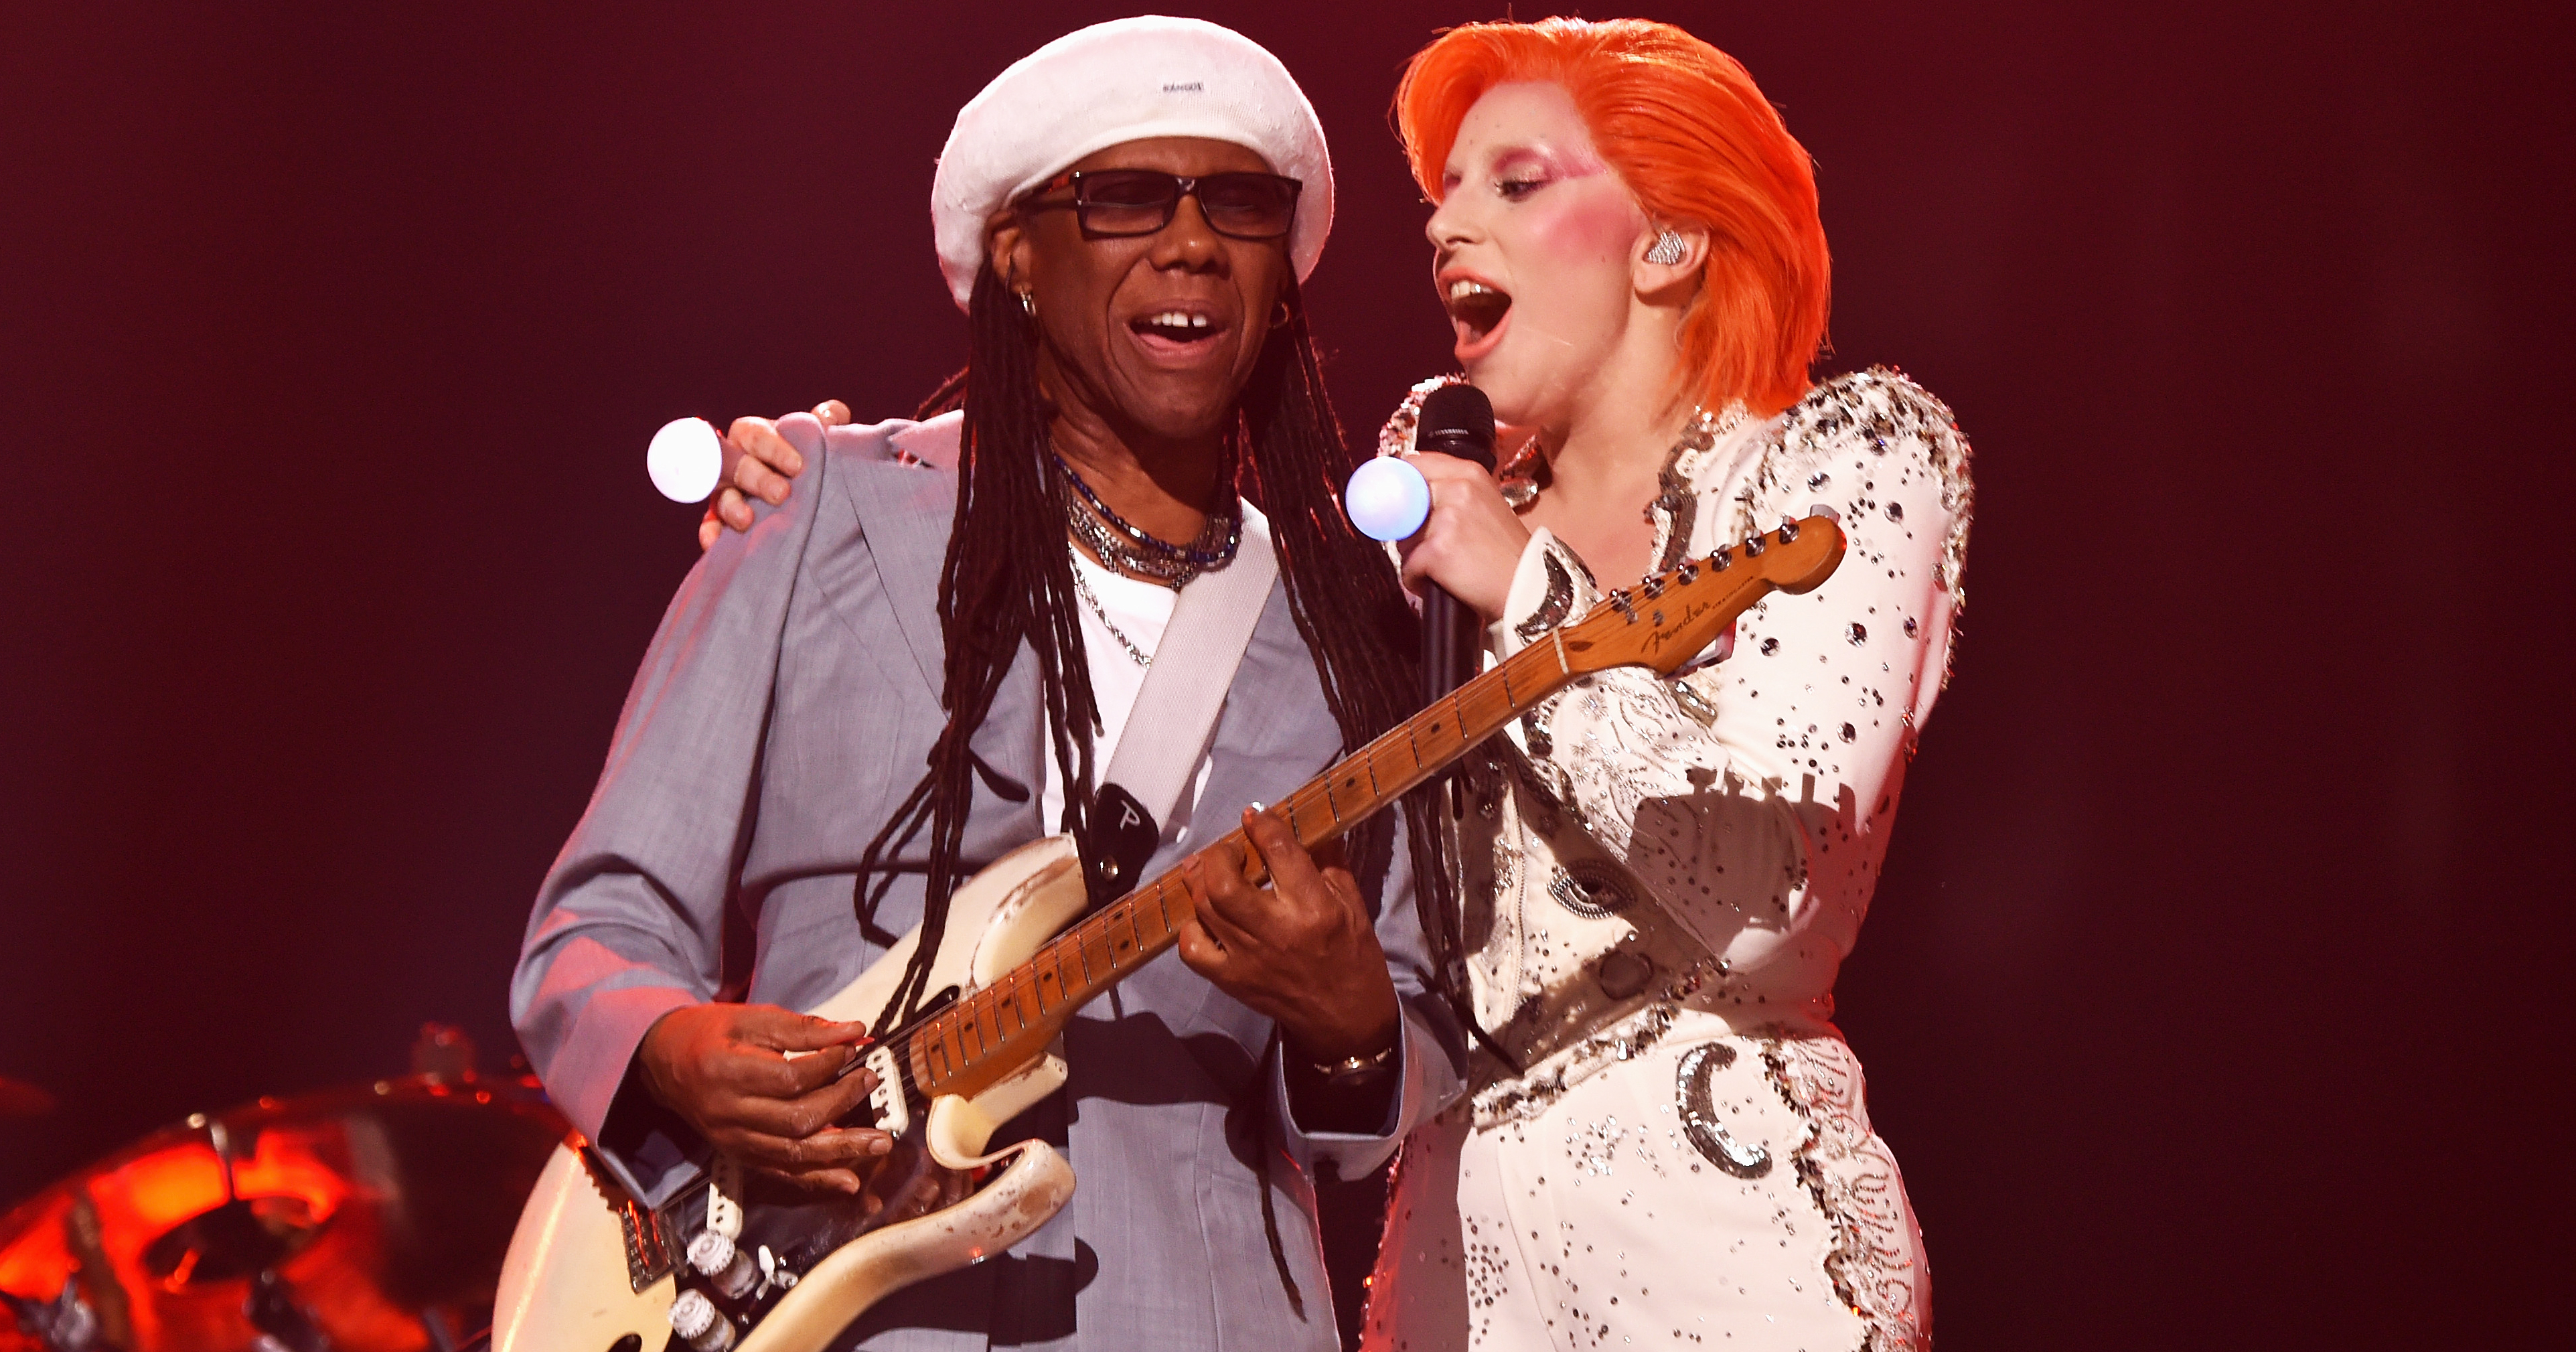 Nile Rodgers, left, and Lady Gaga, right, perform during the 58th GRAMMY Awards on Feb. 15, 2016 in Los Angeles. (Larry Busacca—Getty Images)